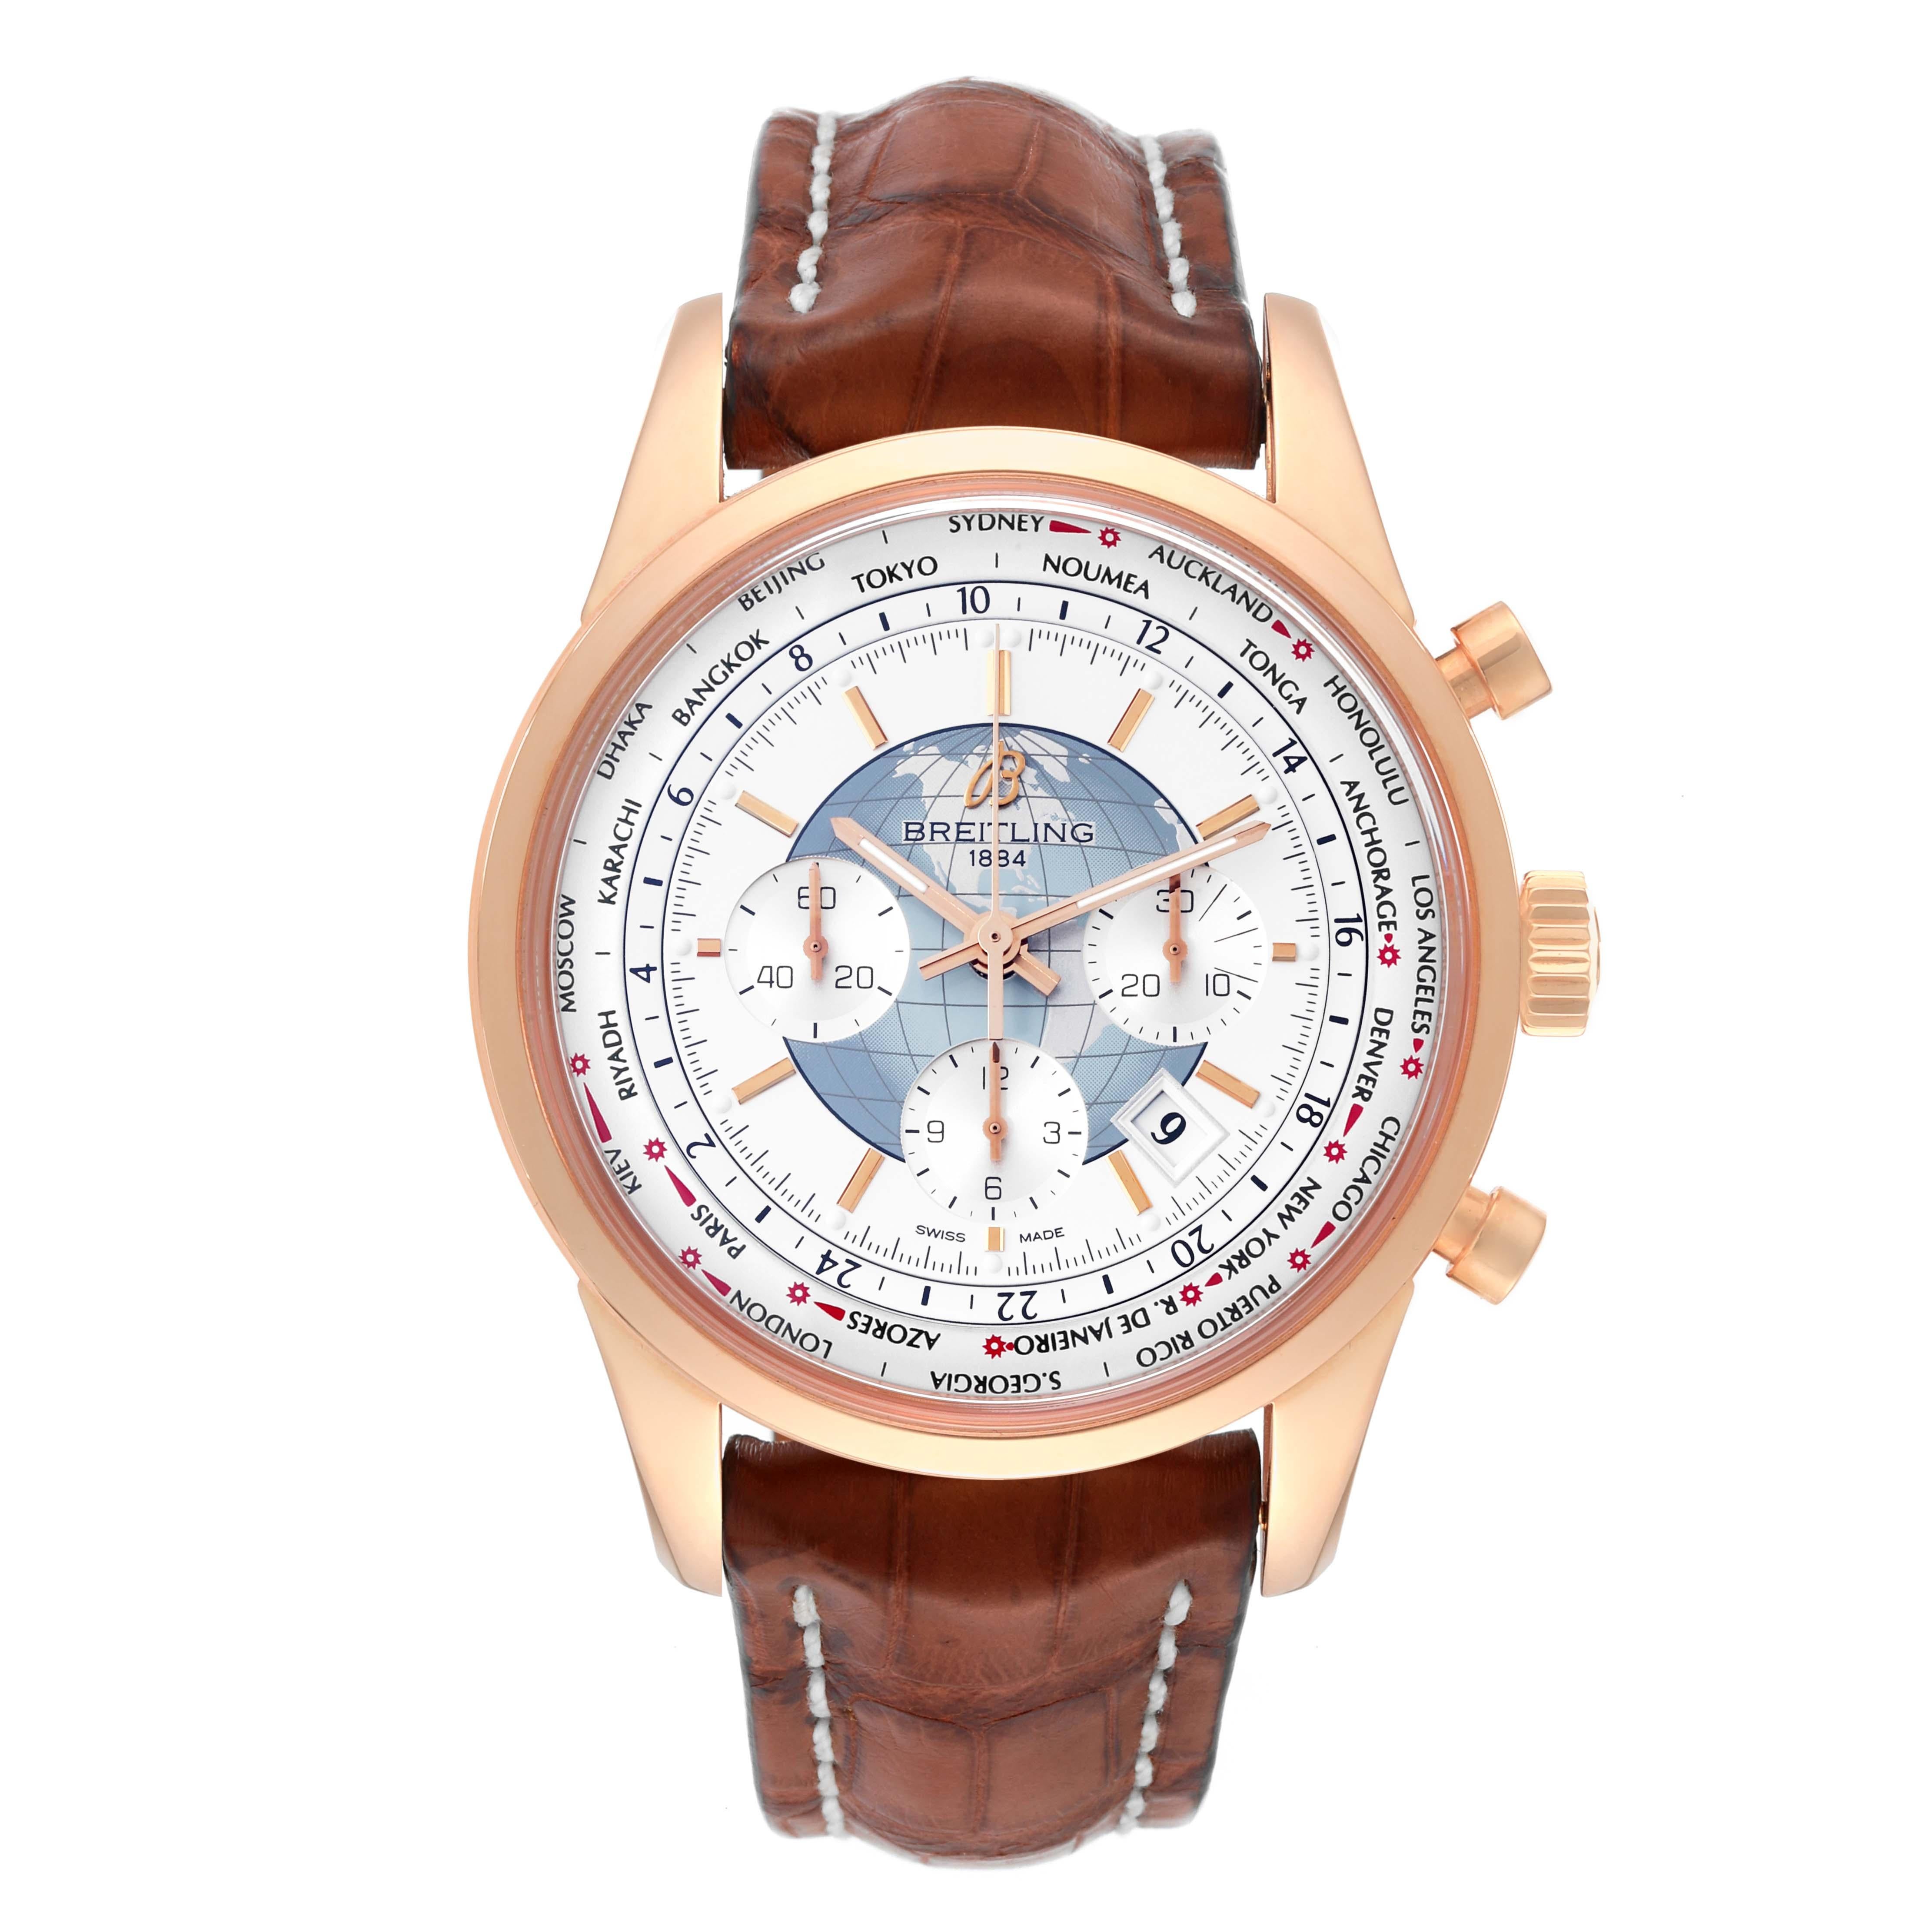 Breitling Transocean Chronograph Unitime Rose Gold Mens Watch RB0510. Automatic self-winding chronograph movement. 18K rose gold case 46 mm in diameter. 18K rose gold bezel. Scratch resistant sapphire crystal. White dial with luminescent rose gold